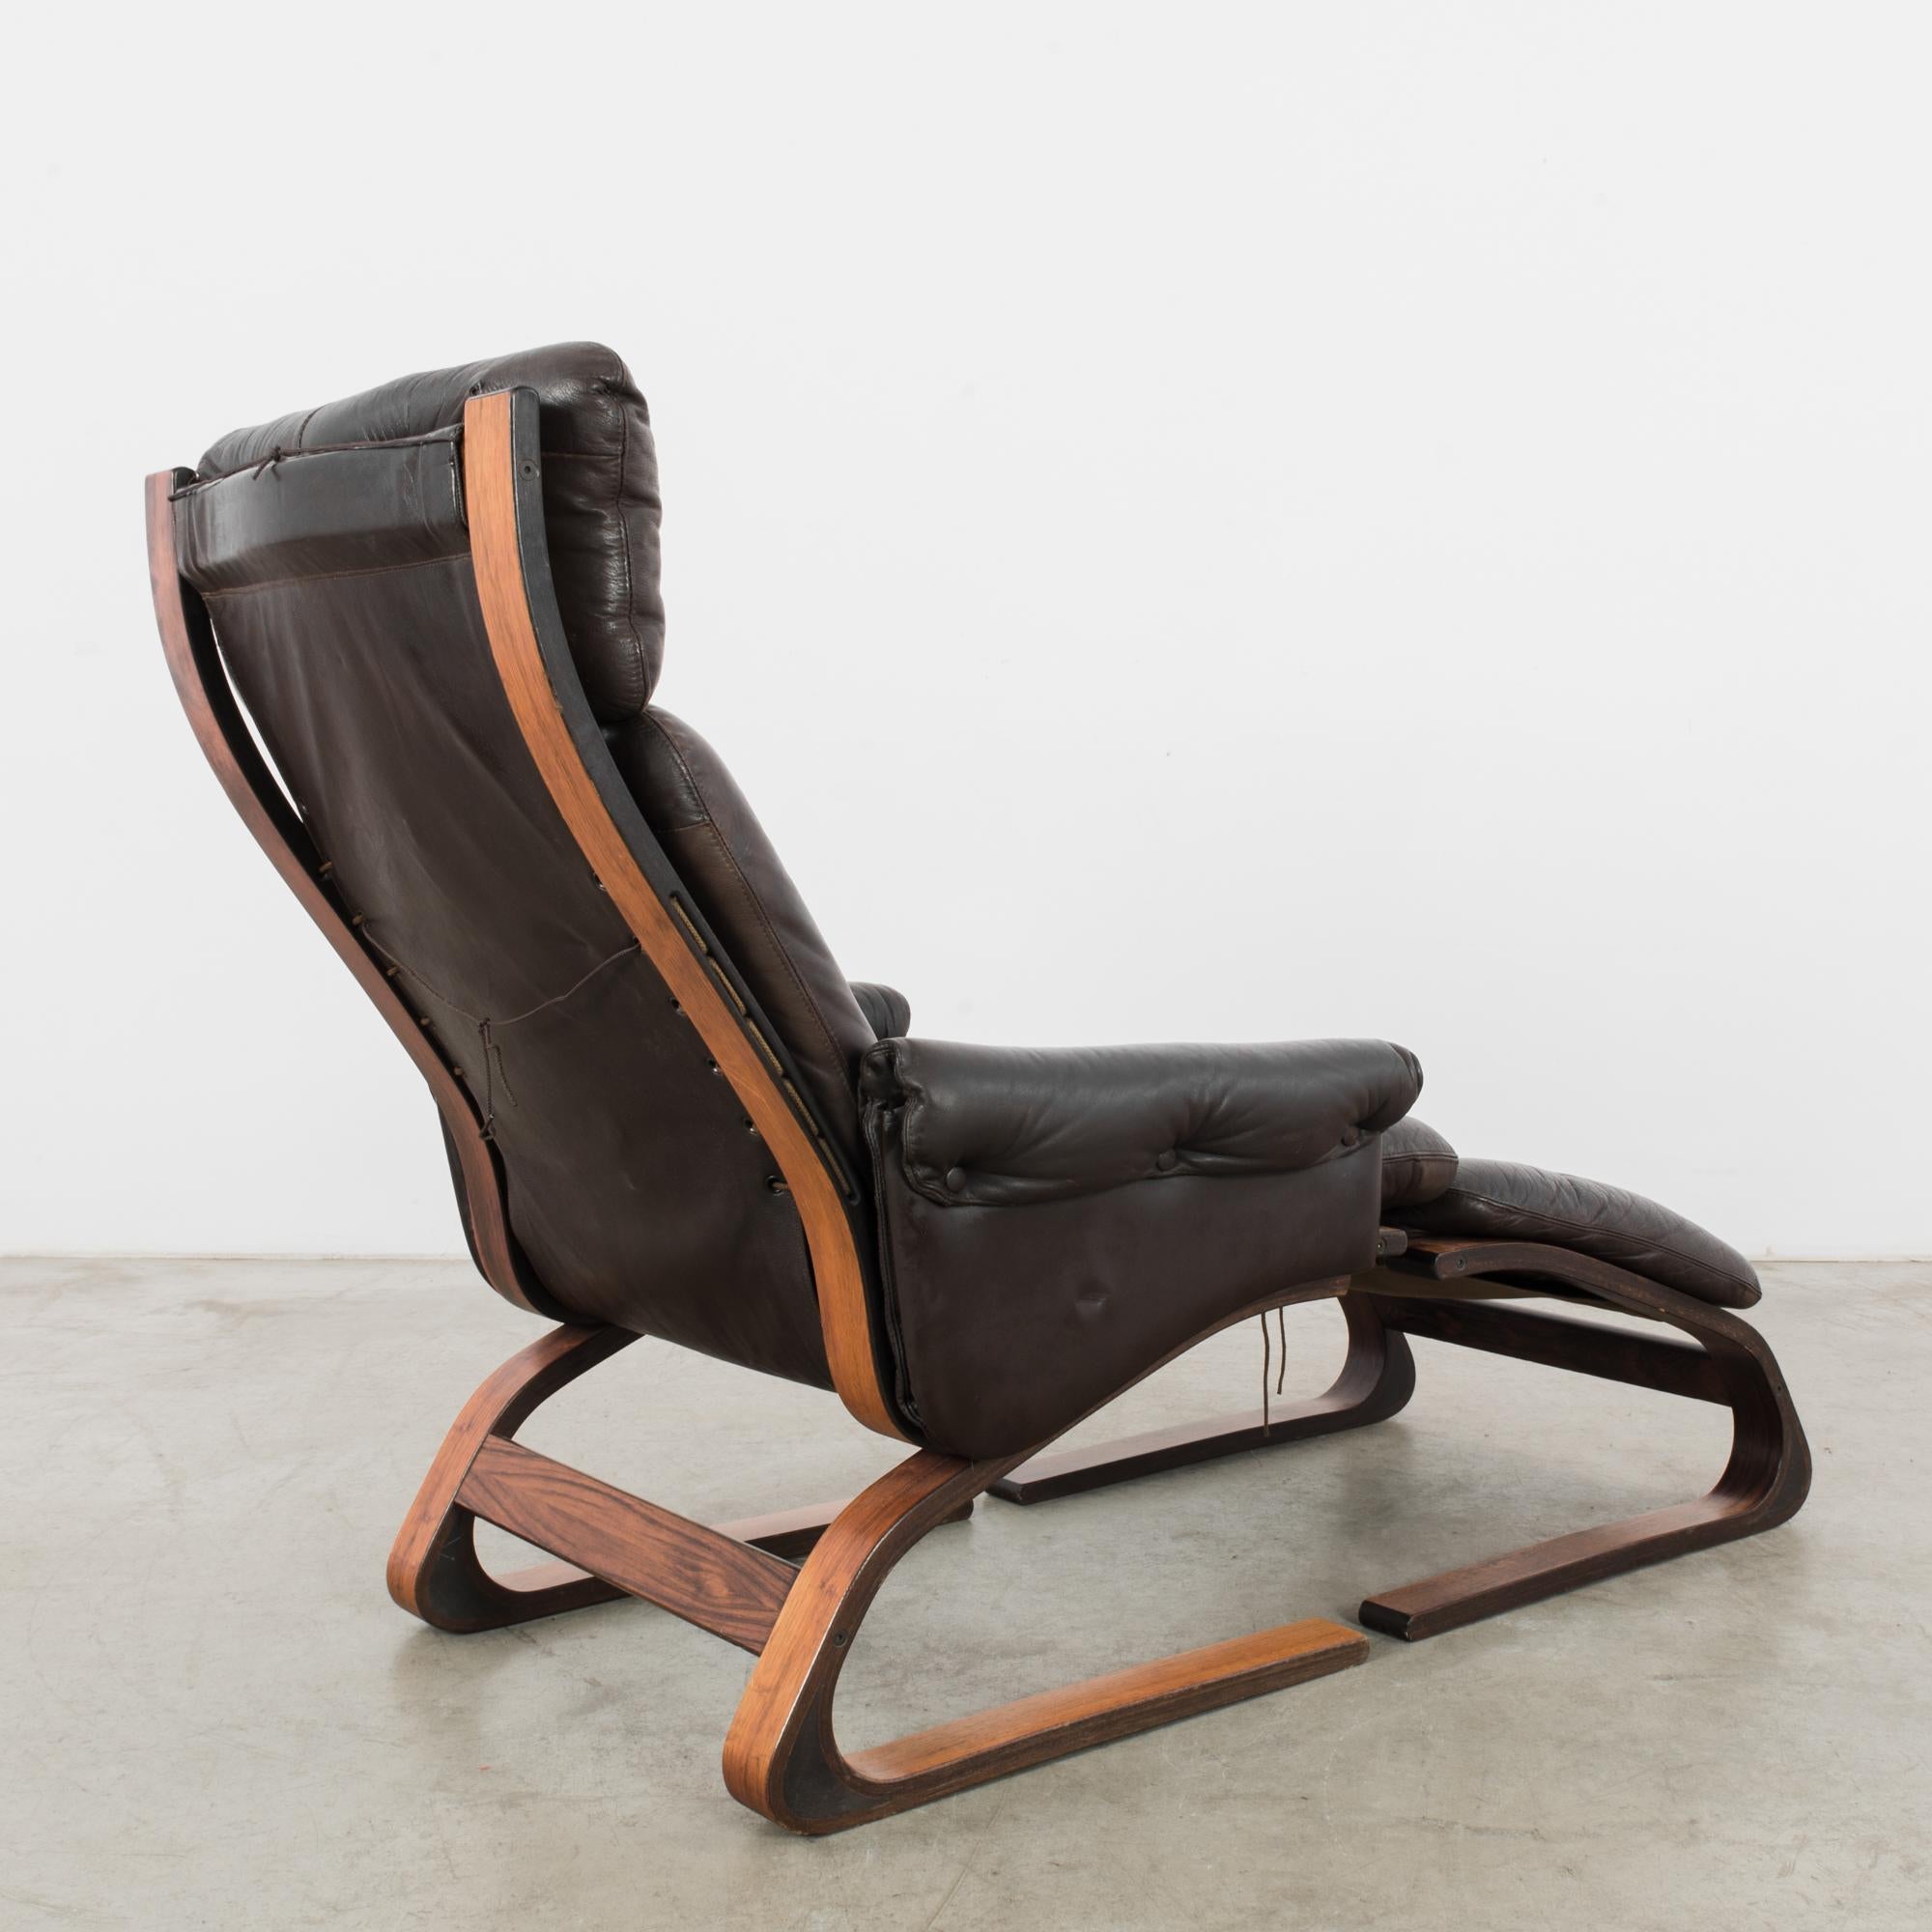 A vintage Kengu lounge chair with ottoman, designed by Elsa & Nordahl Solheim for Rykken and Co., produced circa 1971. Plush, dark brown leather on a frame of laminated bent pine wood makes for chic, modern comfort. Expanding upon Norwegian